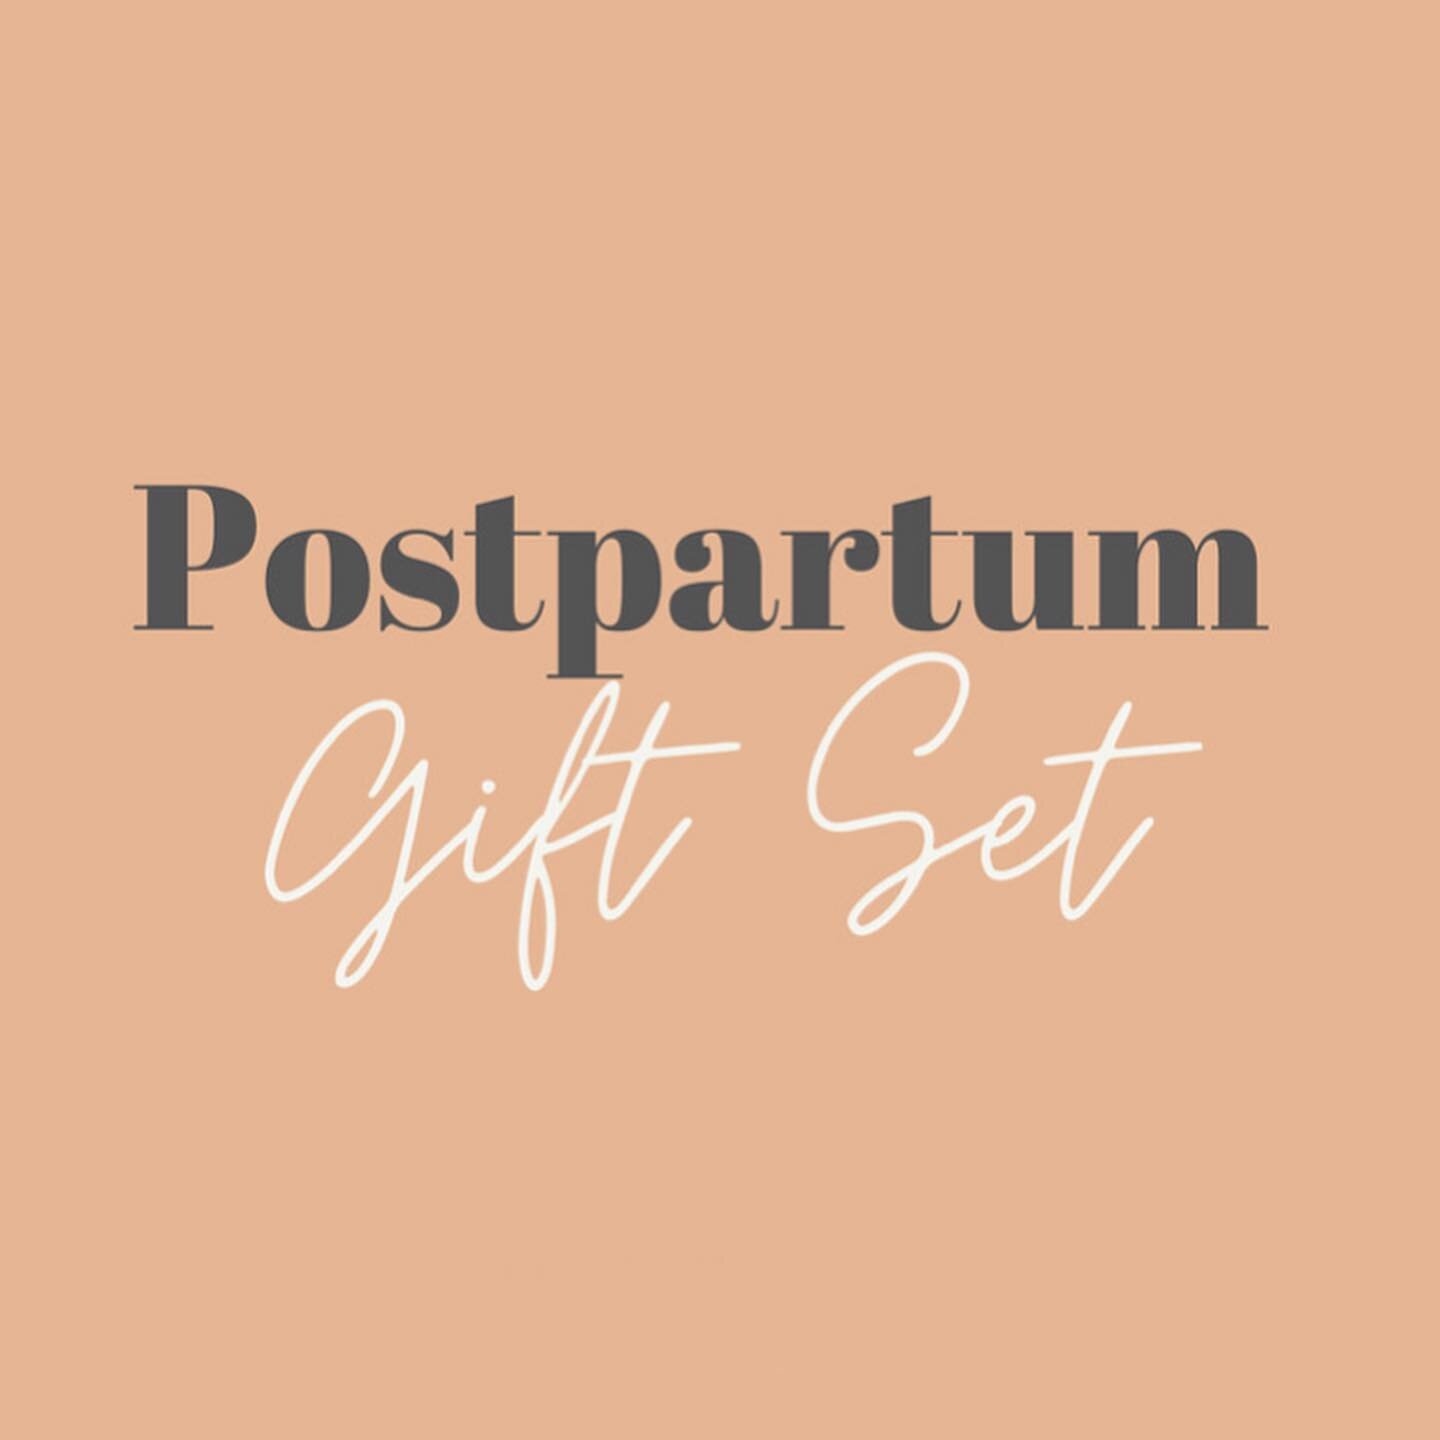 🎁POSTPARTUM GIFT SET 🎁

This is the perfect gift for anyone expecting a baby.

The kit includes our best selling postpartum items:

✨Revive: postpartum herbal formula to replenish qi and blood 

✨Vitamin D: so important for hormone health, especial